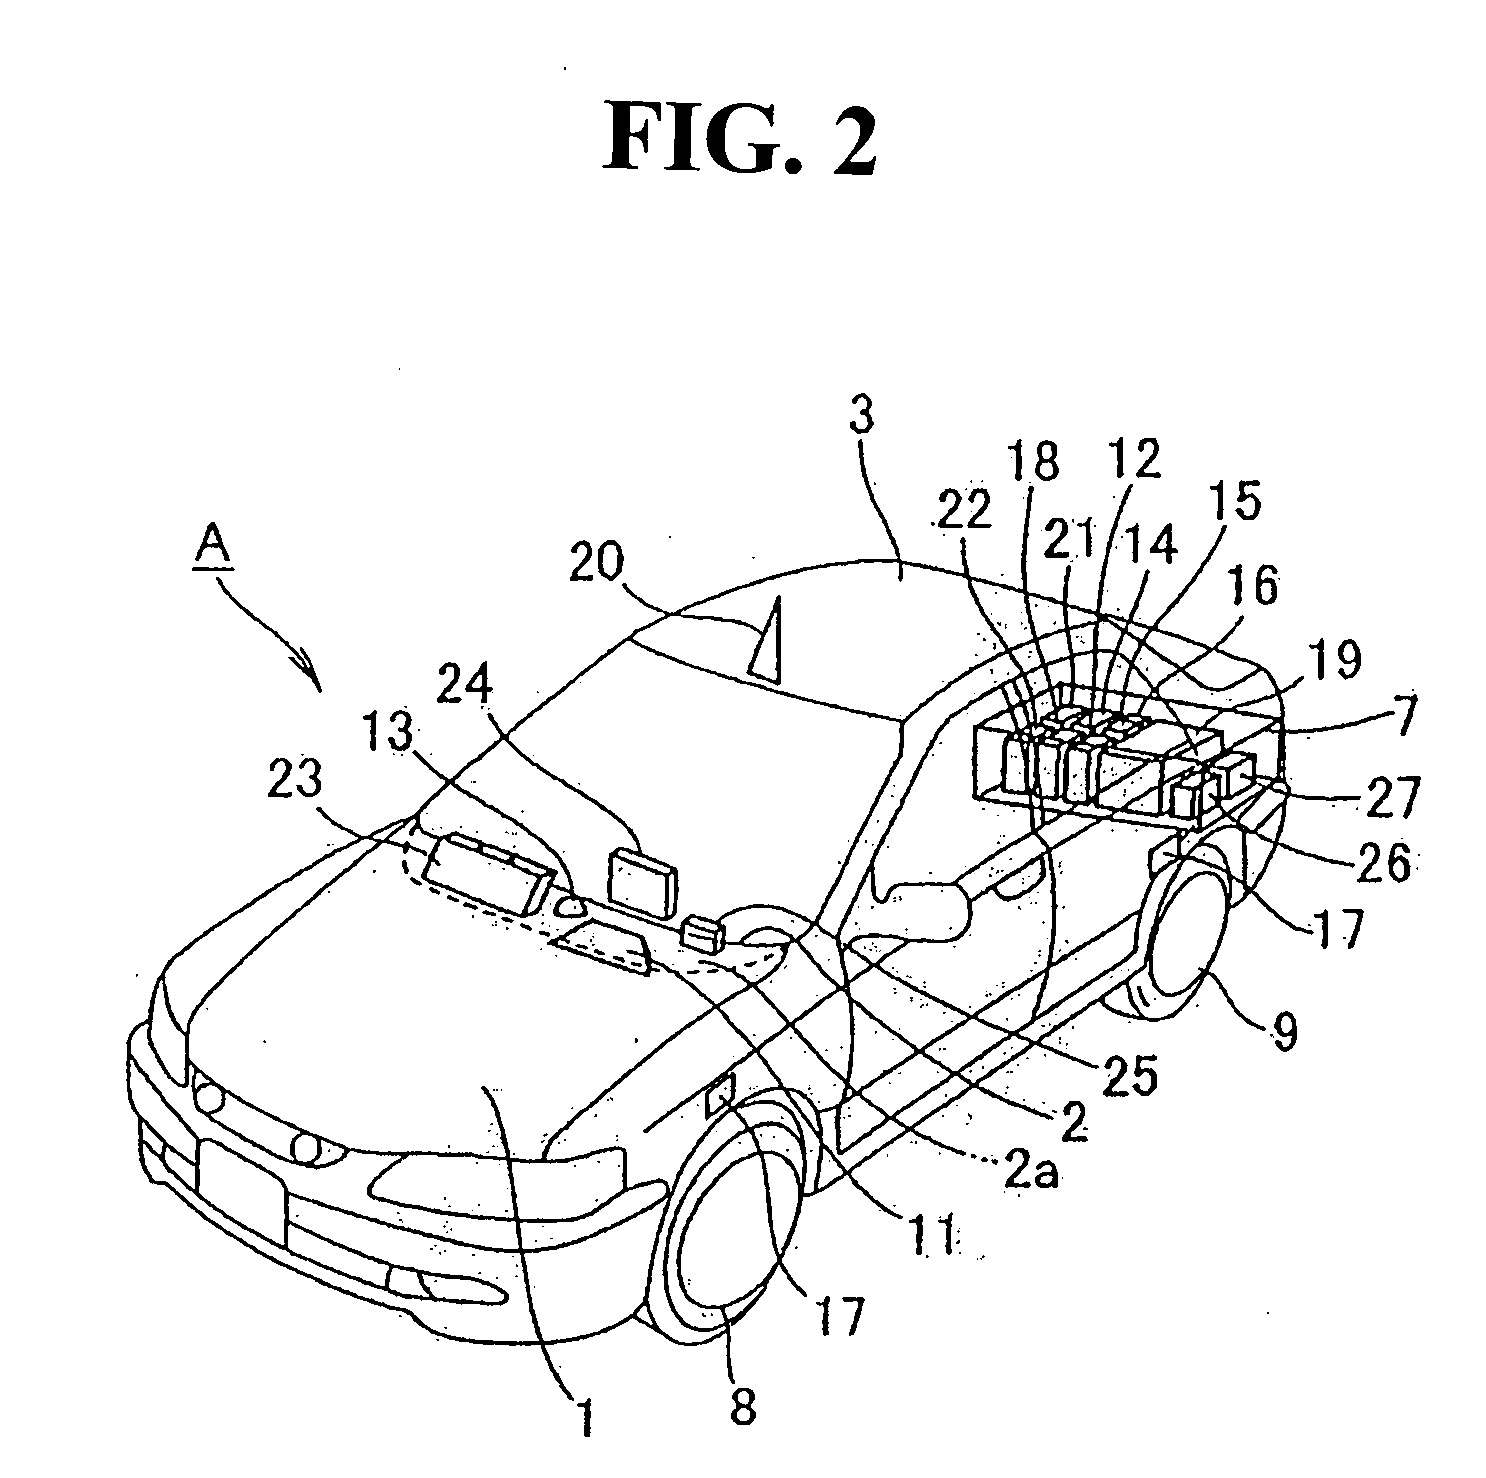 Vehicle position detection system